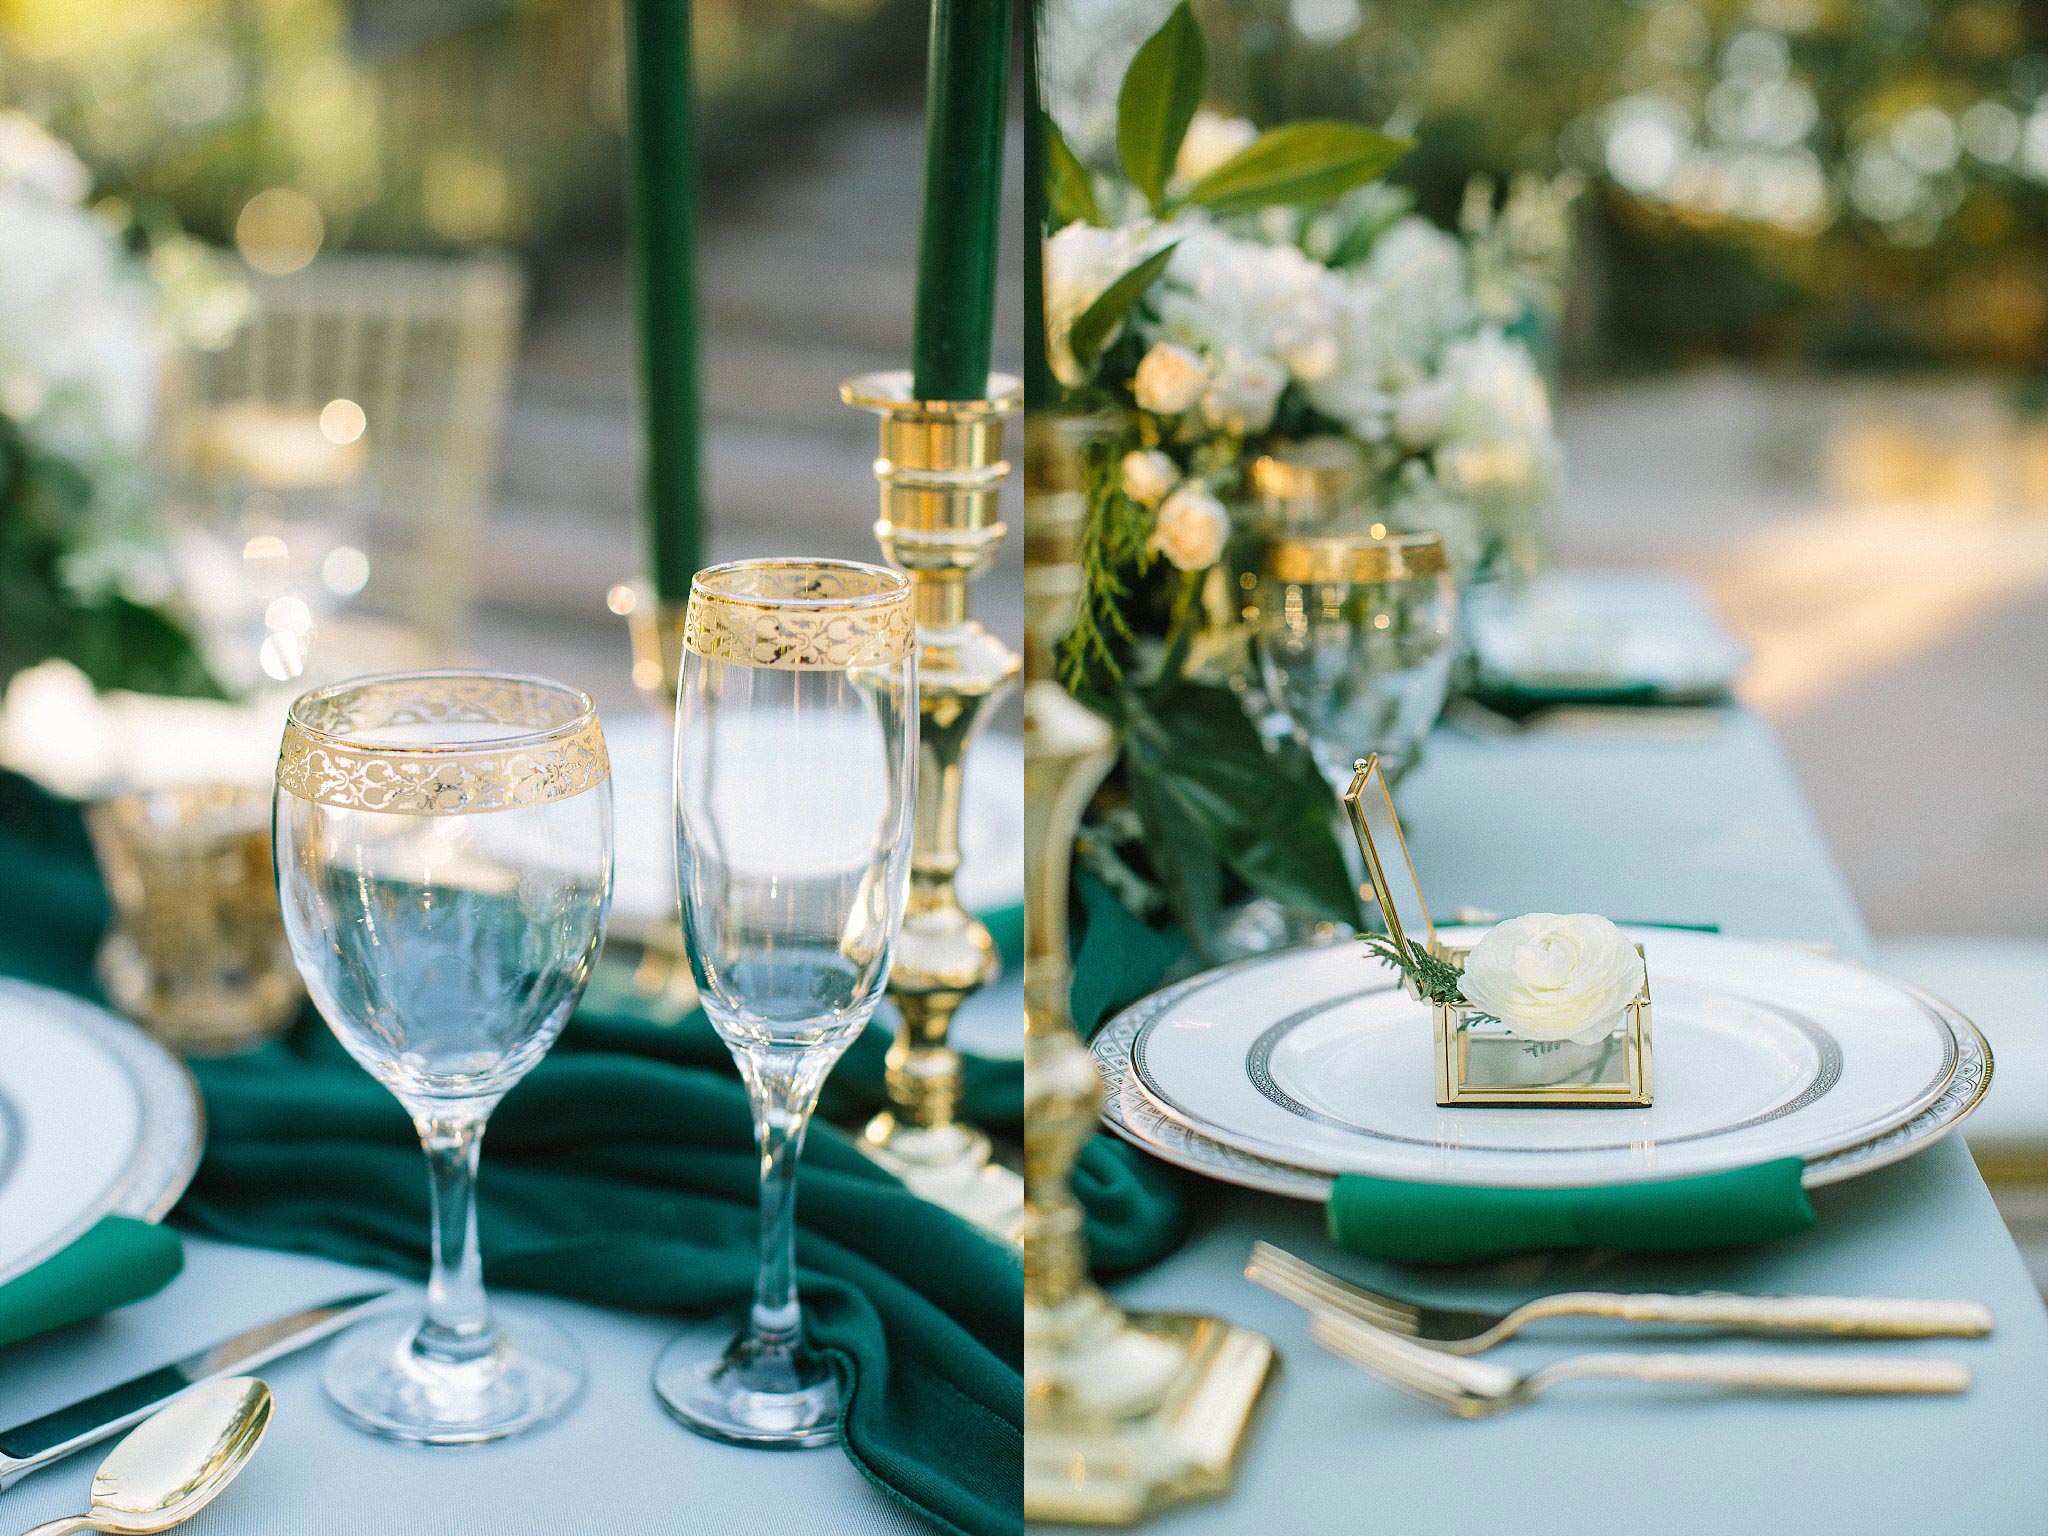 aristide mansfield wedding grey reception table with gold goblets